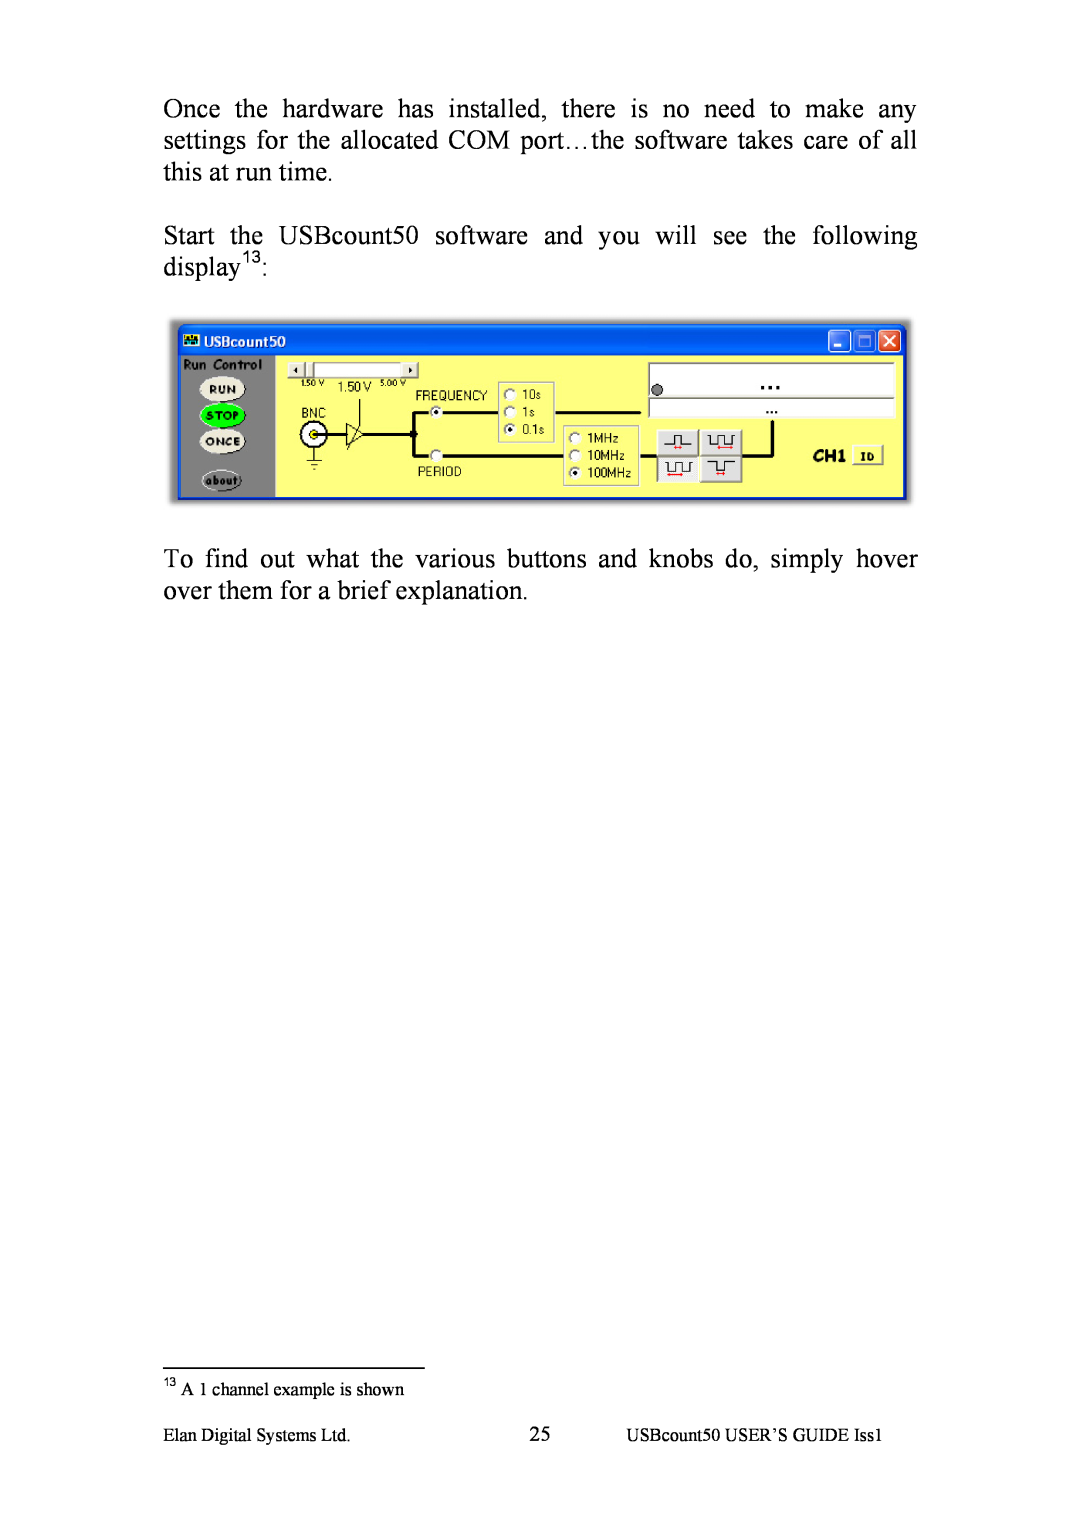 Key Digital ES381 manual 13 A 1 channel example is shown, USBcount50 USER’S GUIDE Iss1 